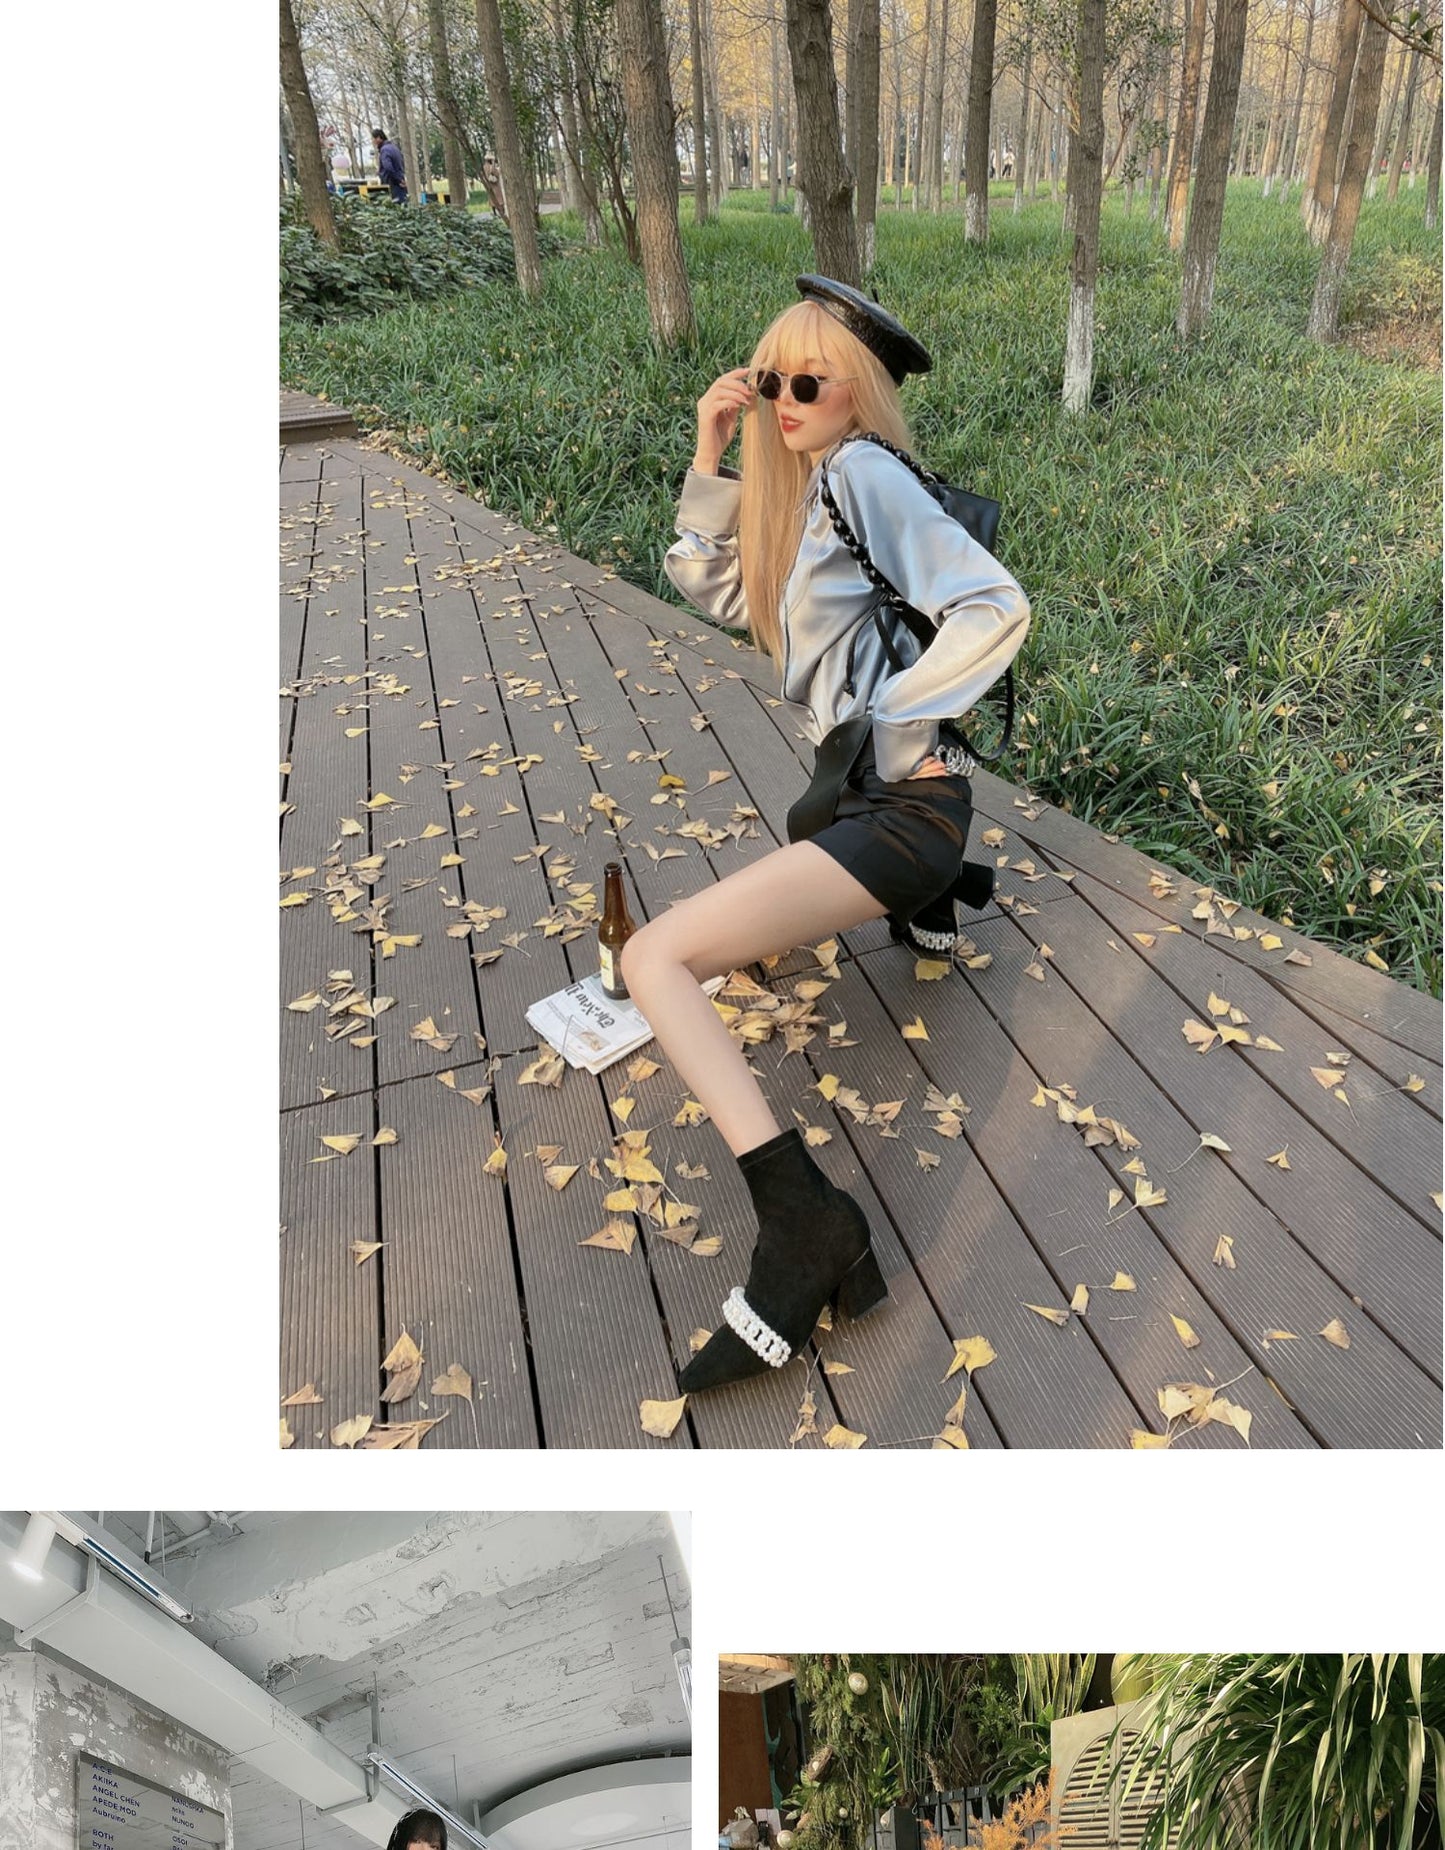 FEIFEI original design pointed short tube winter suede pearl elastic boots ankle boots- Botas